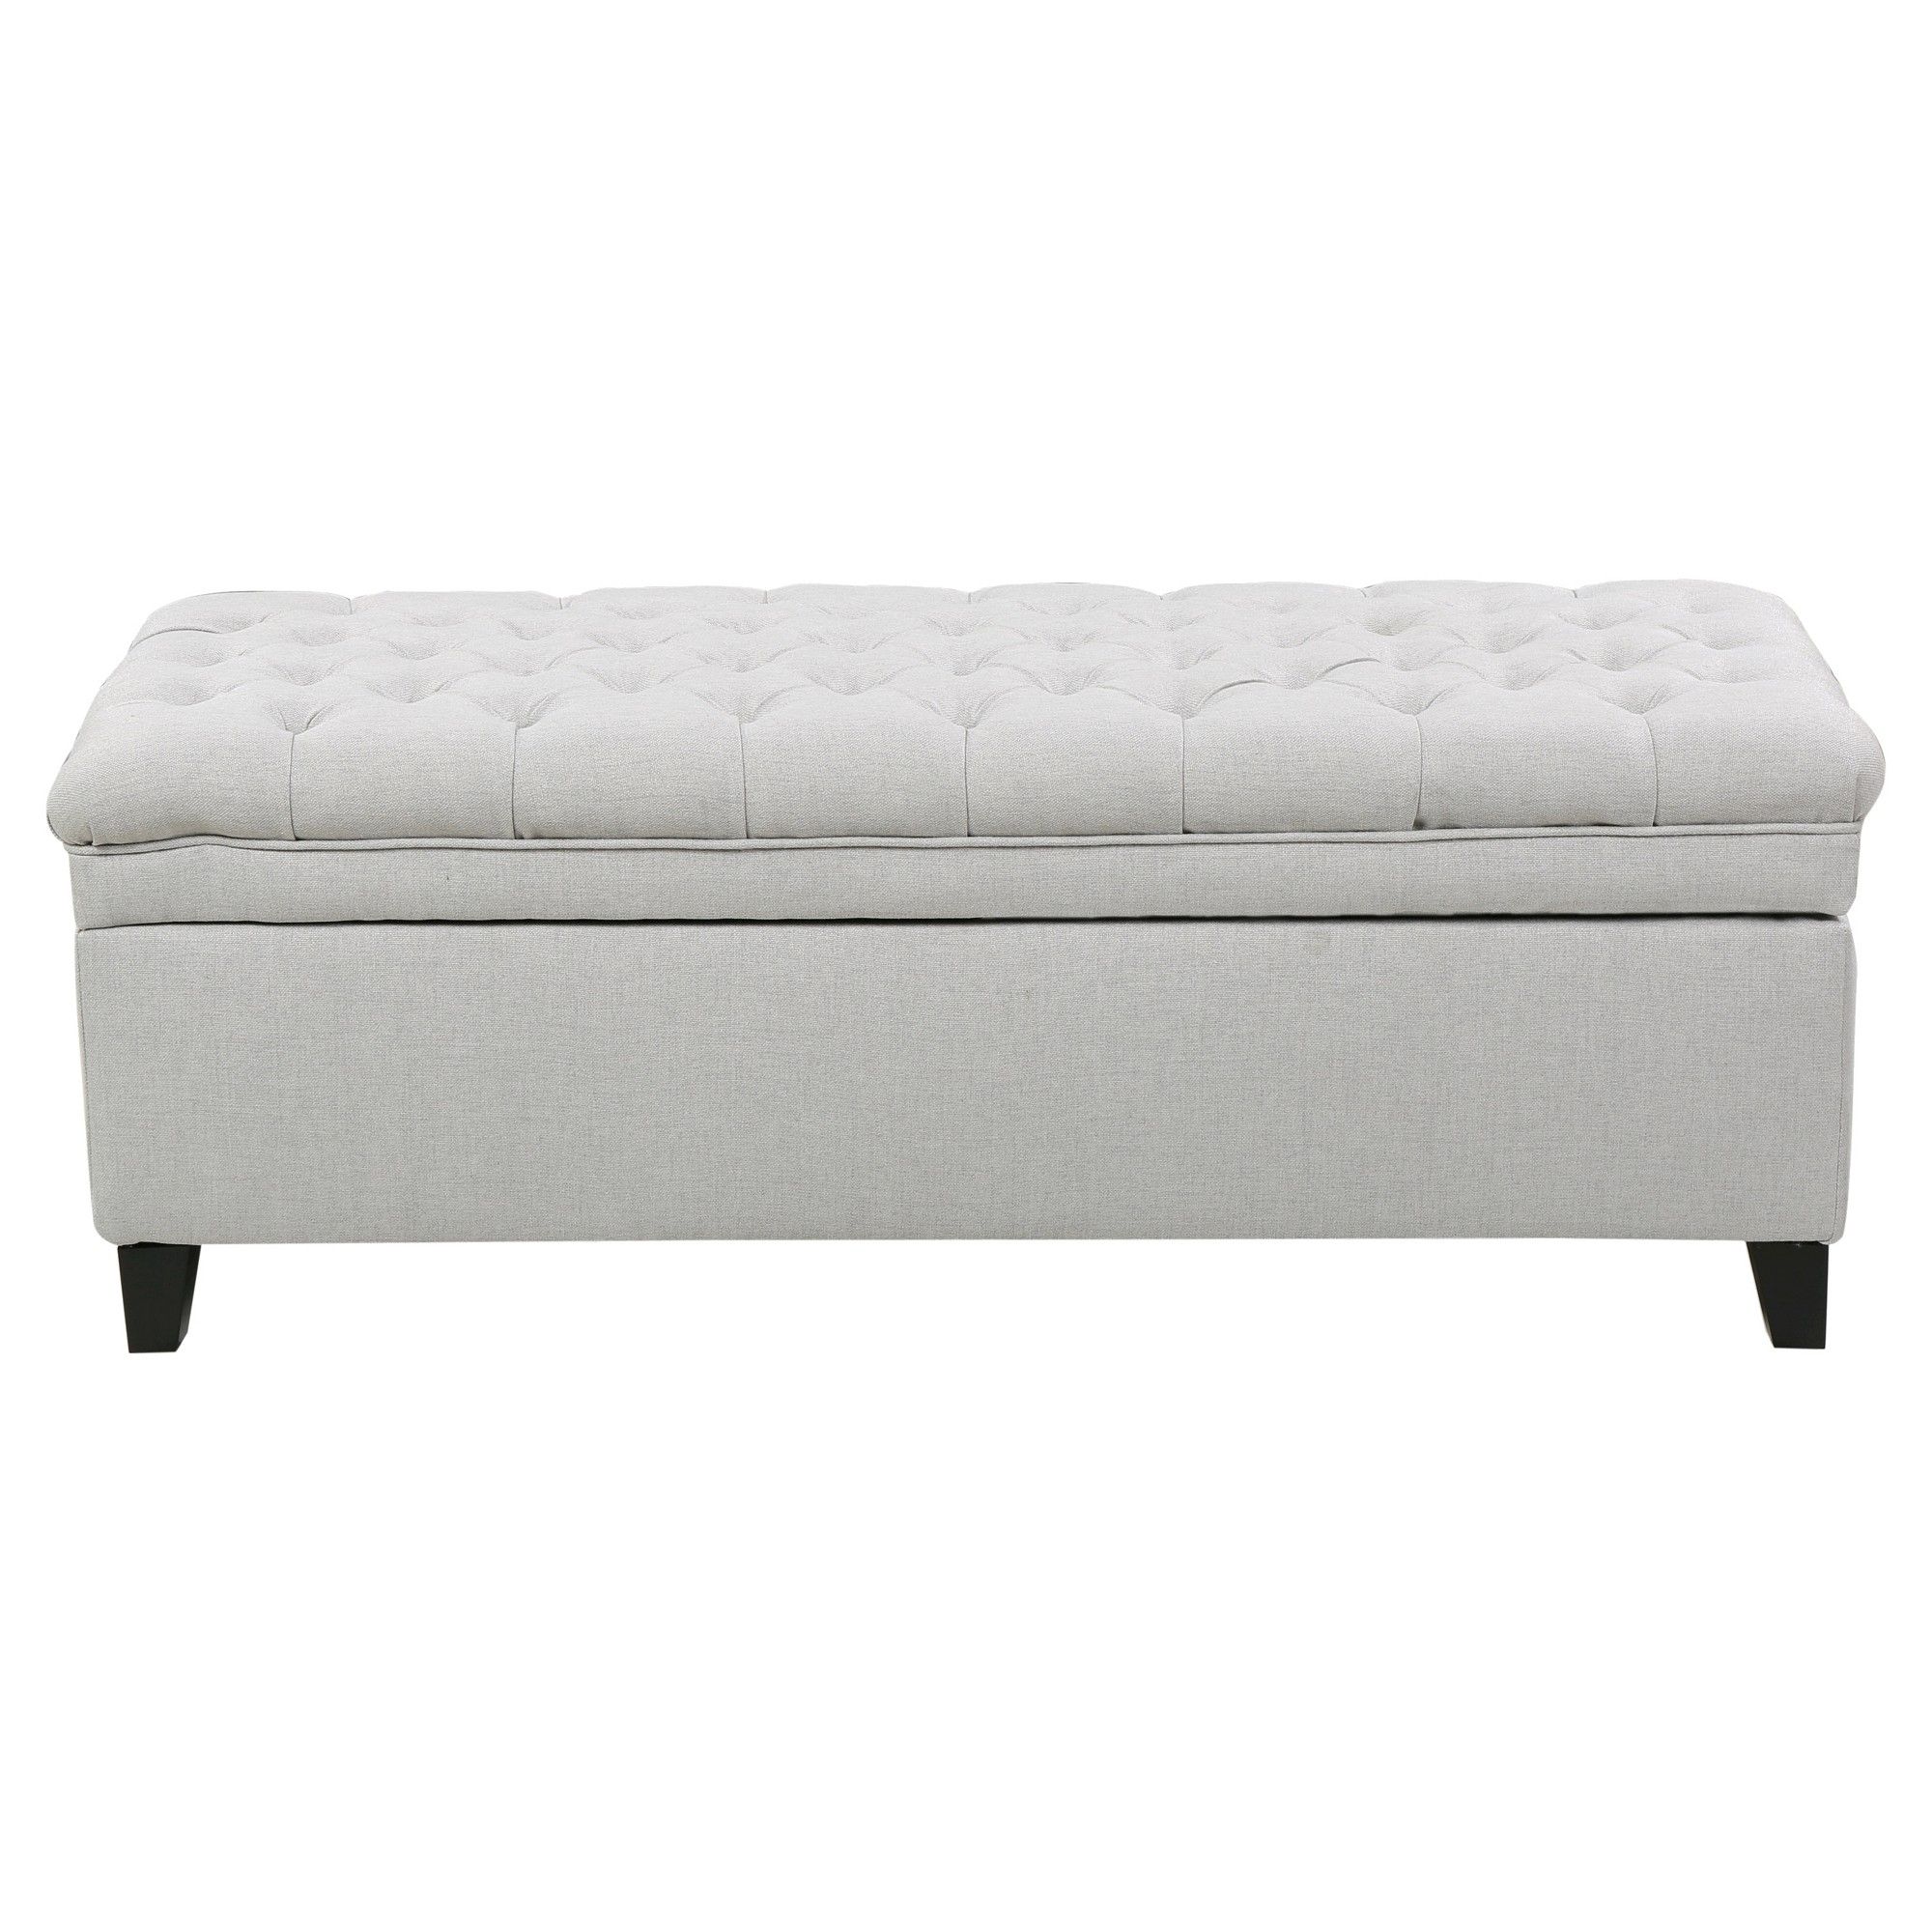 Juliana Storage Ottoman Light Gray – Christopher Knight Home In 2021 Within Light Gray Velvet Fabric Accent Ottomans (View 12 of 20)